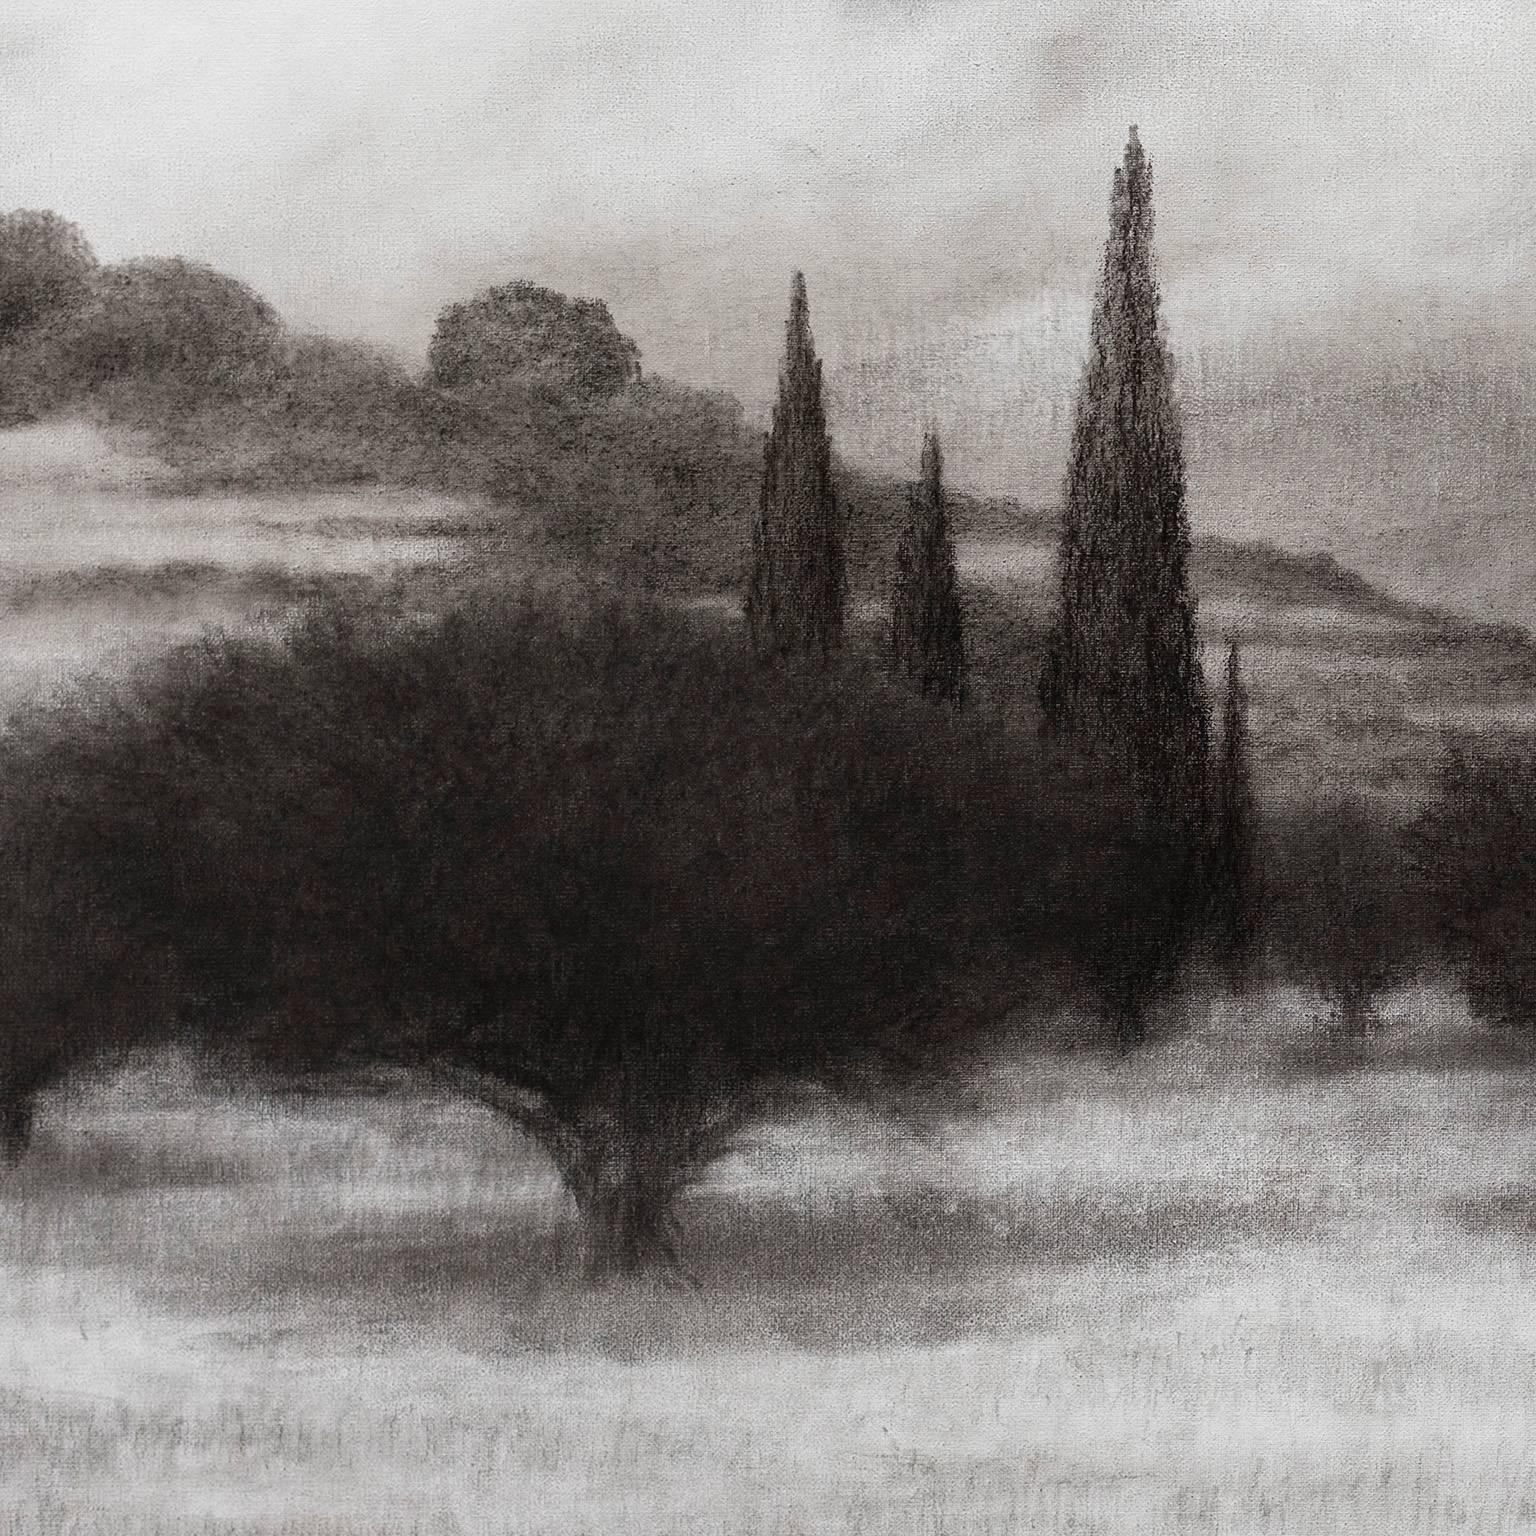 Olive Grove with Cypress Trees - Charcoal Drawing, Greece, Island Black & White - Painting by George Tzannes